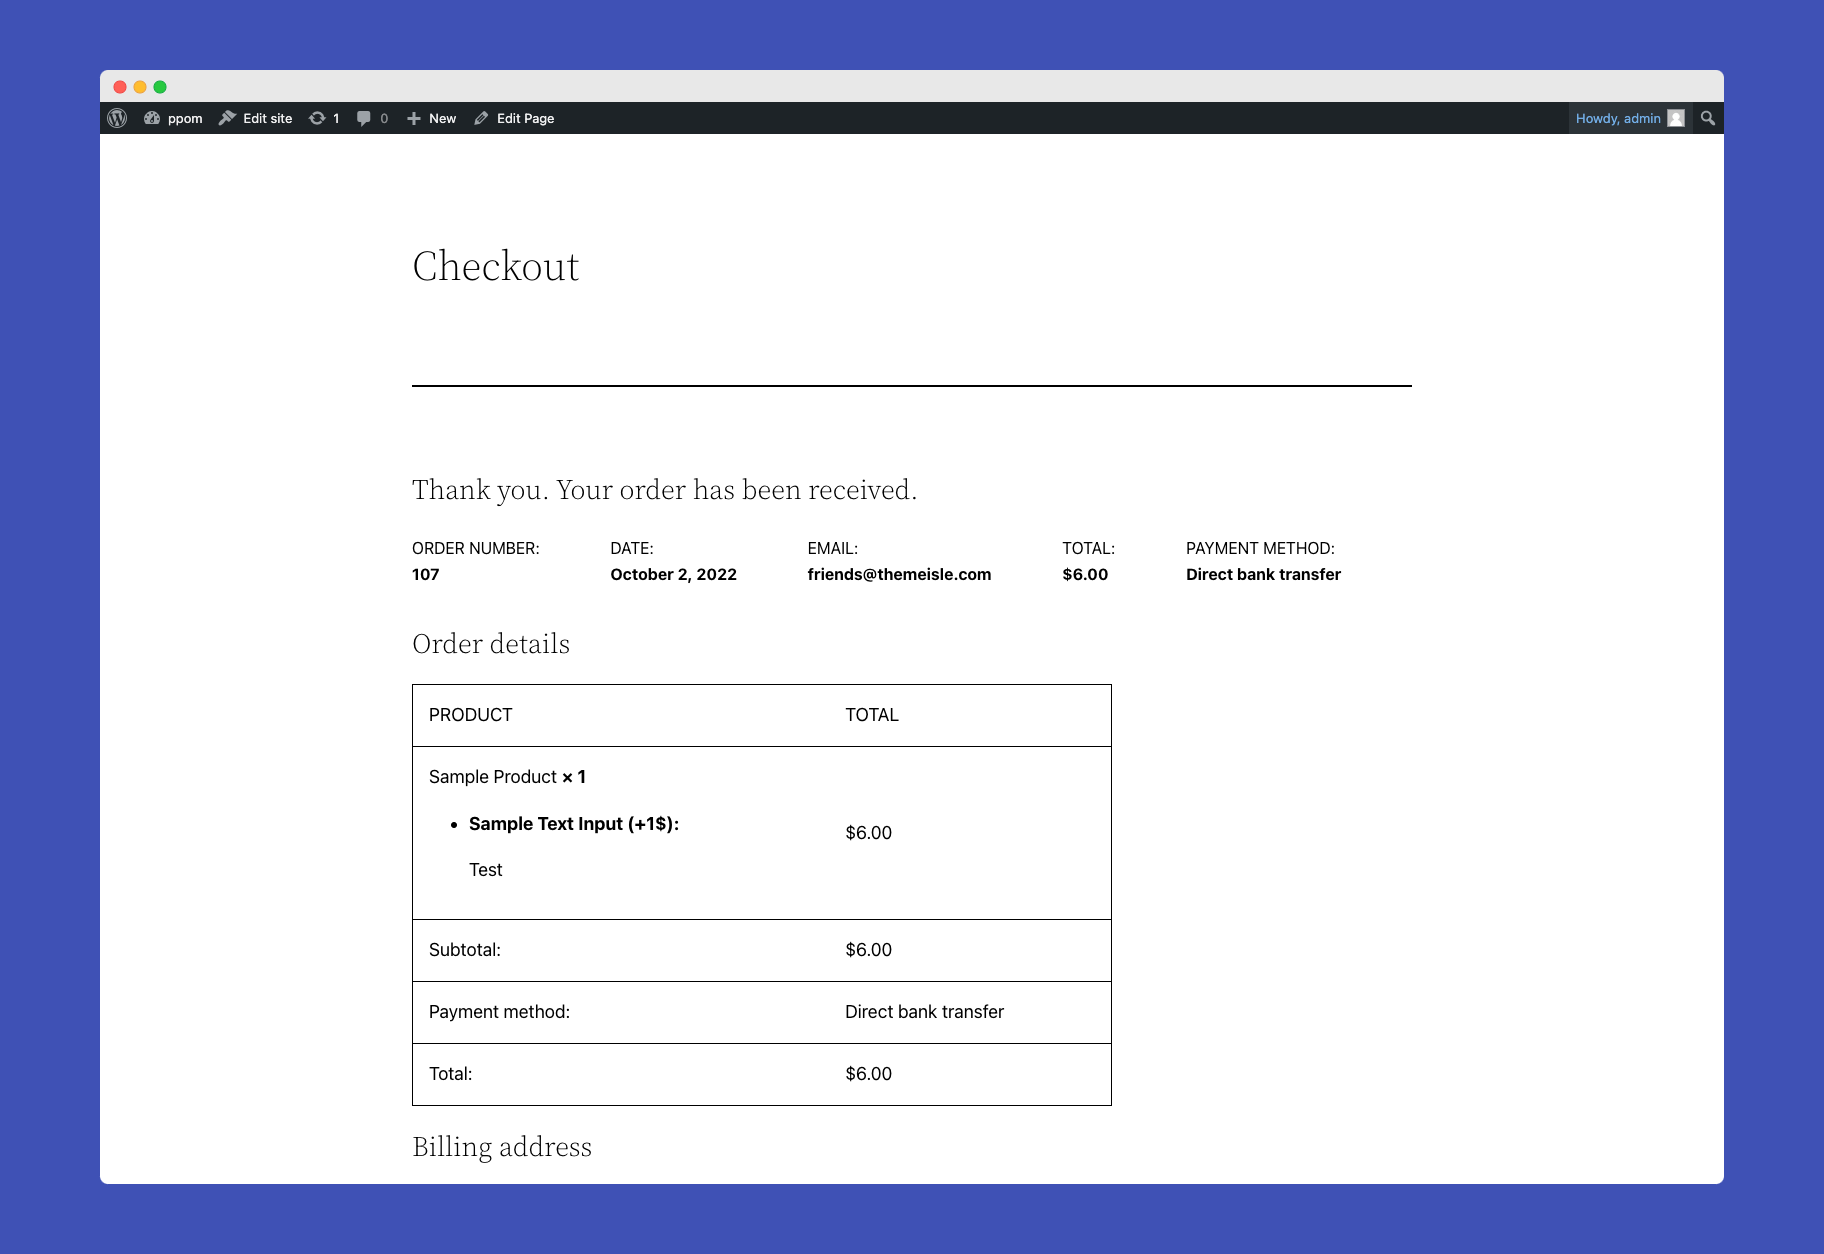 Inputs attached to the checkout page